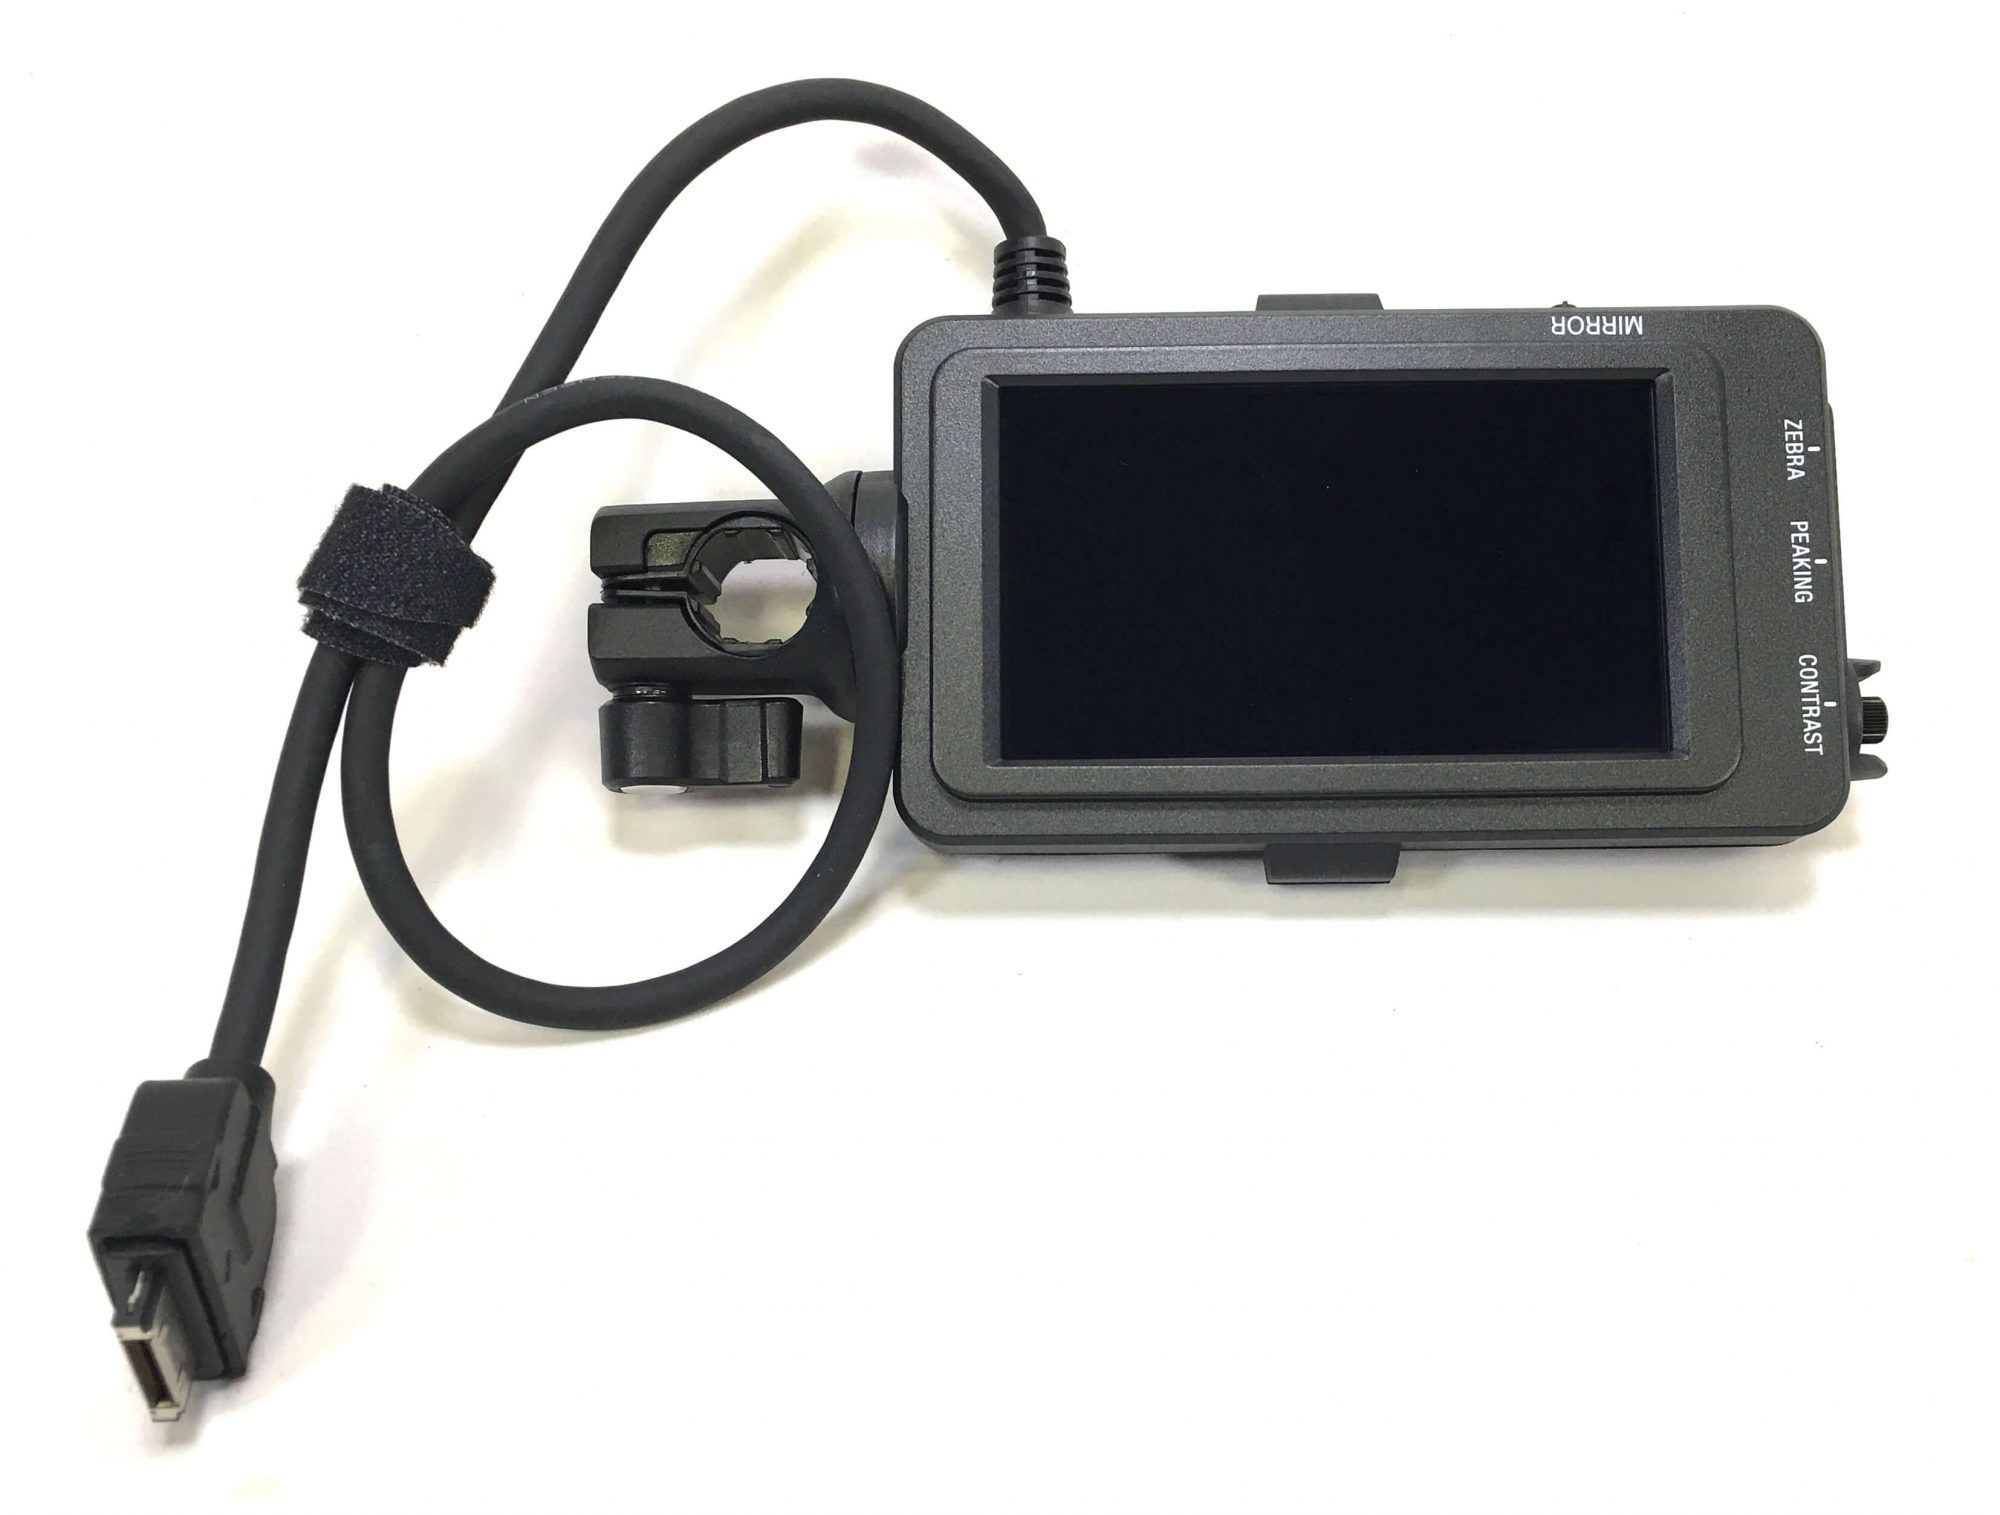 Original LCD Block that fits on the Sony PXW-FS7M2 camcorder. It is a genuine Sony part, sourced directly from Sony USA. Brand new factory fresh. Free Shipping.